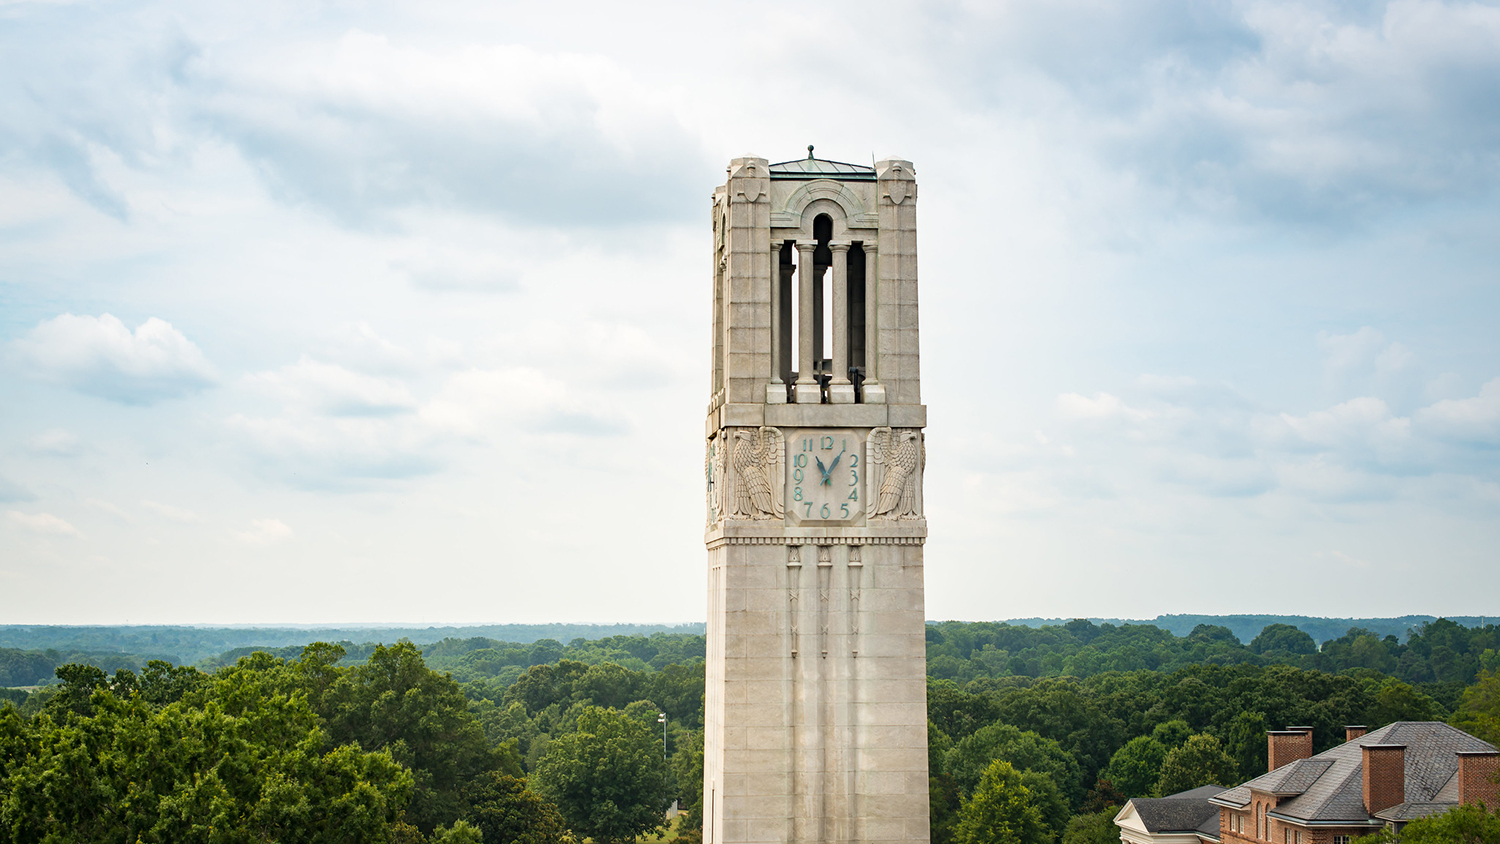 Photograph of NC State University Belltower during the day in Raleigh, North Carolina.